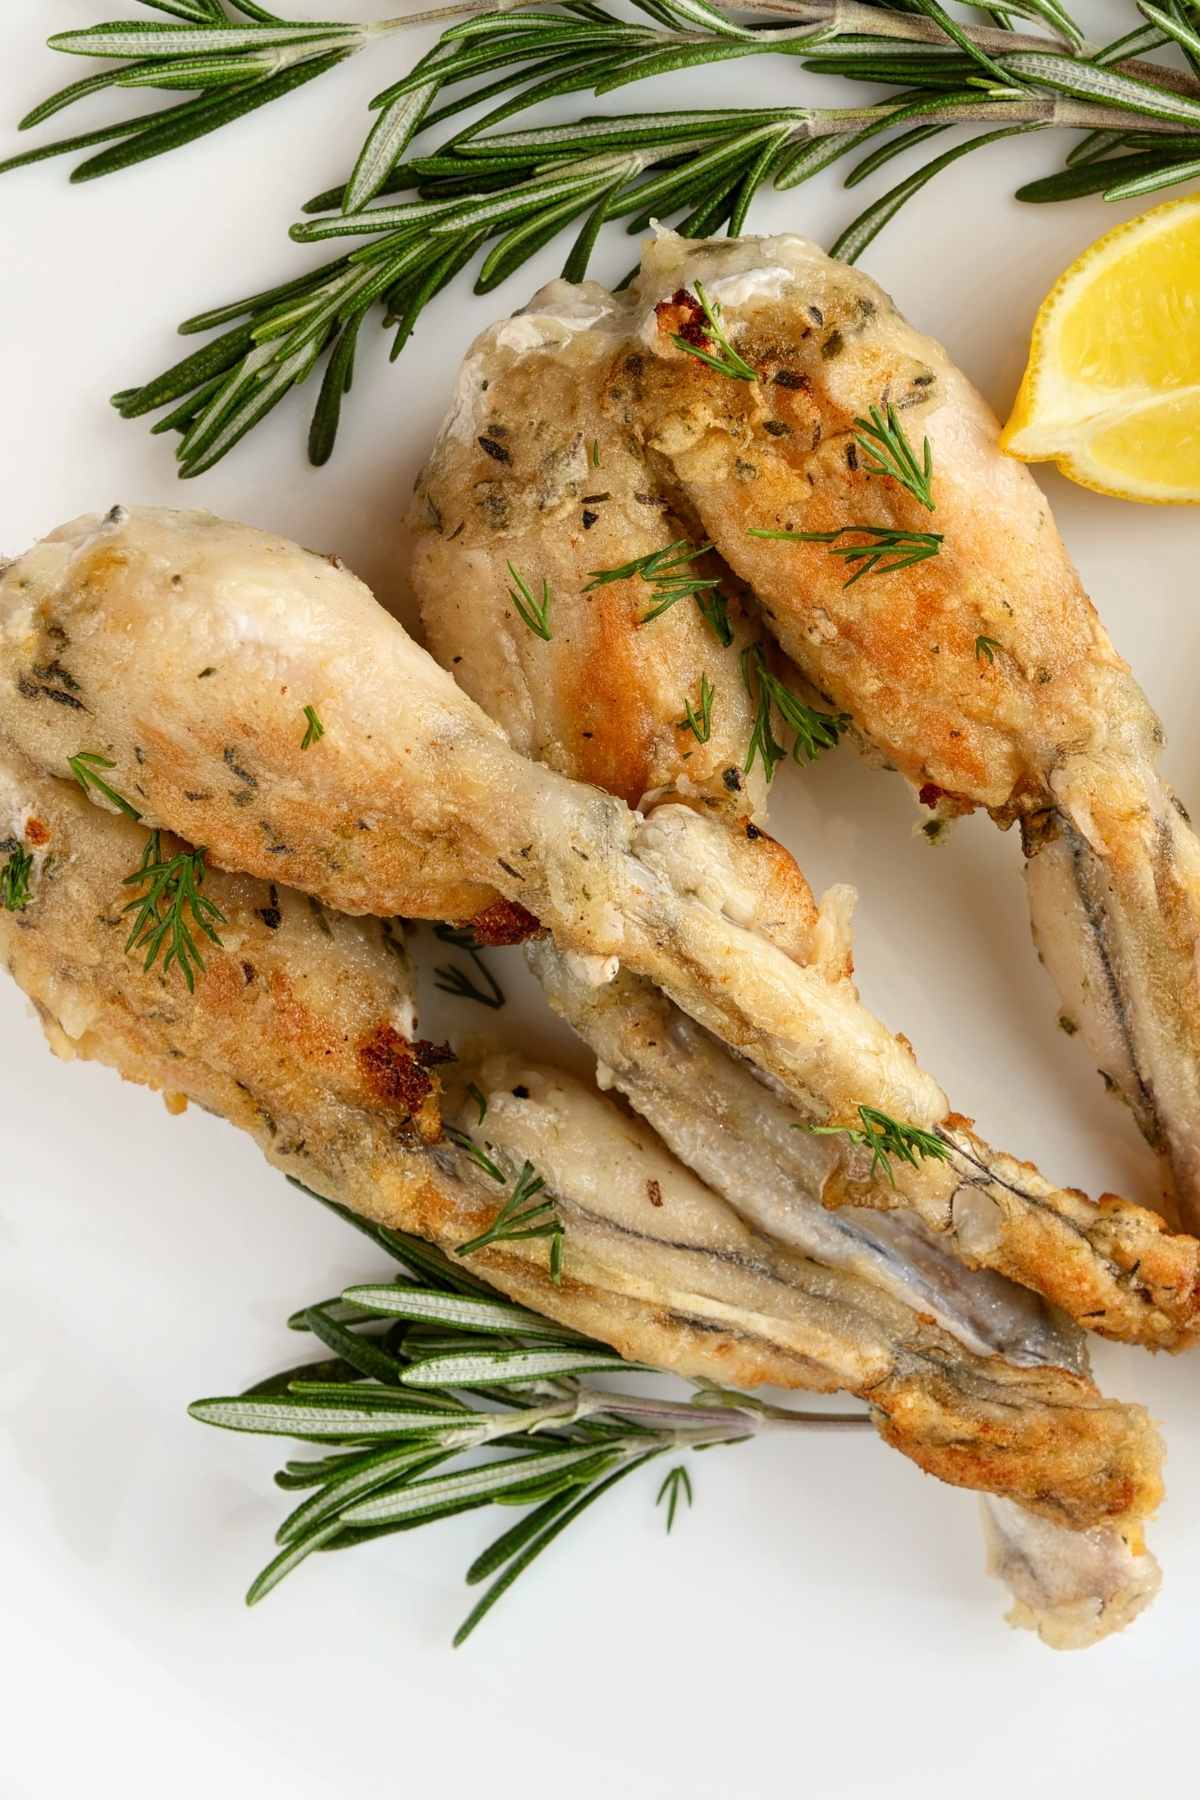 Crispy on the outside and tender on the inside, these fried frog legs are a perfect appetizer that’s easy to make and sure to impress. The secret is to coat the frog with a thin layer of flour before frying, resulting in a succulent texture and unbelievable flavor. Within less than 30 minutes, you’ll be serving up a plate of tender and flavorful frog legs.